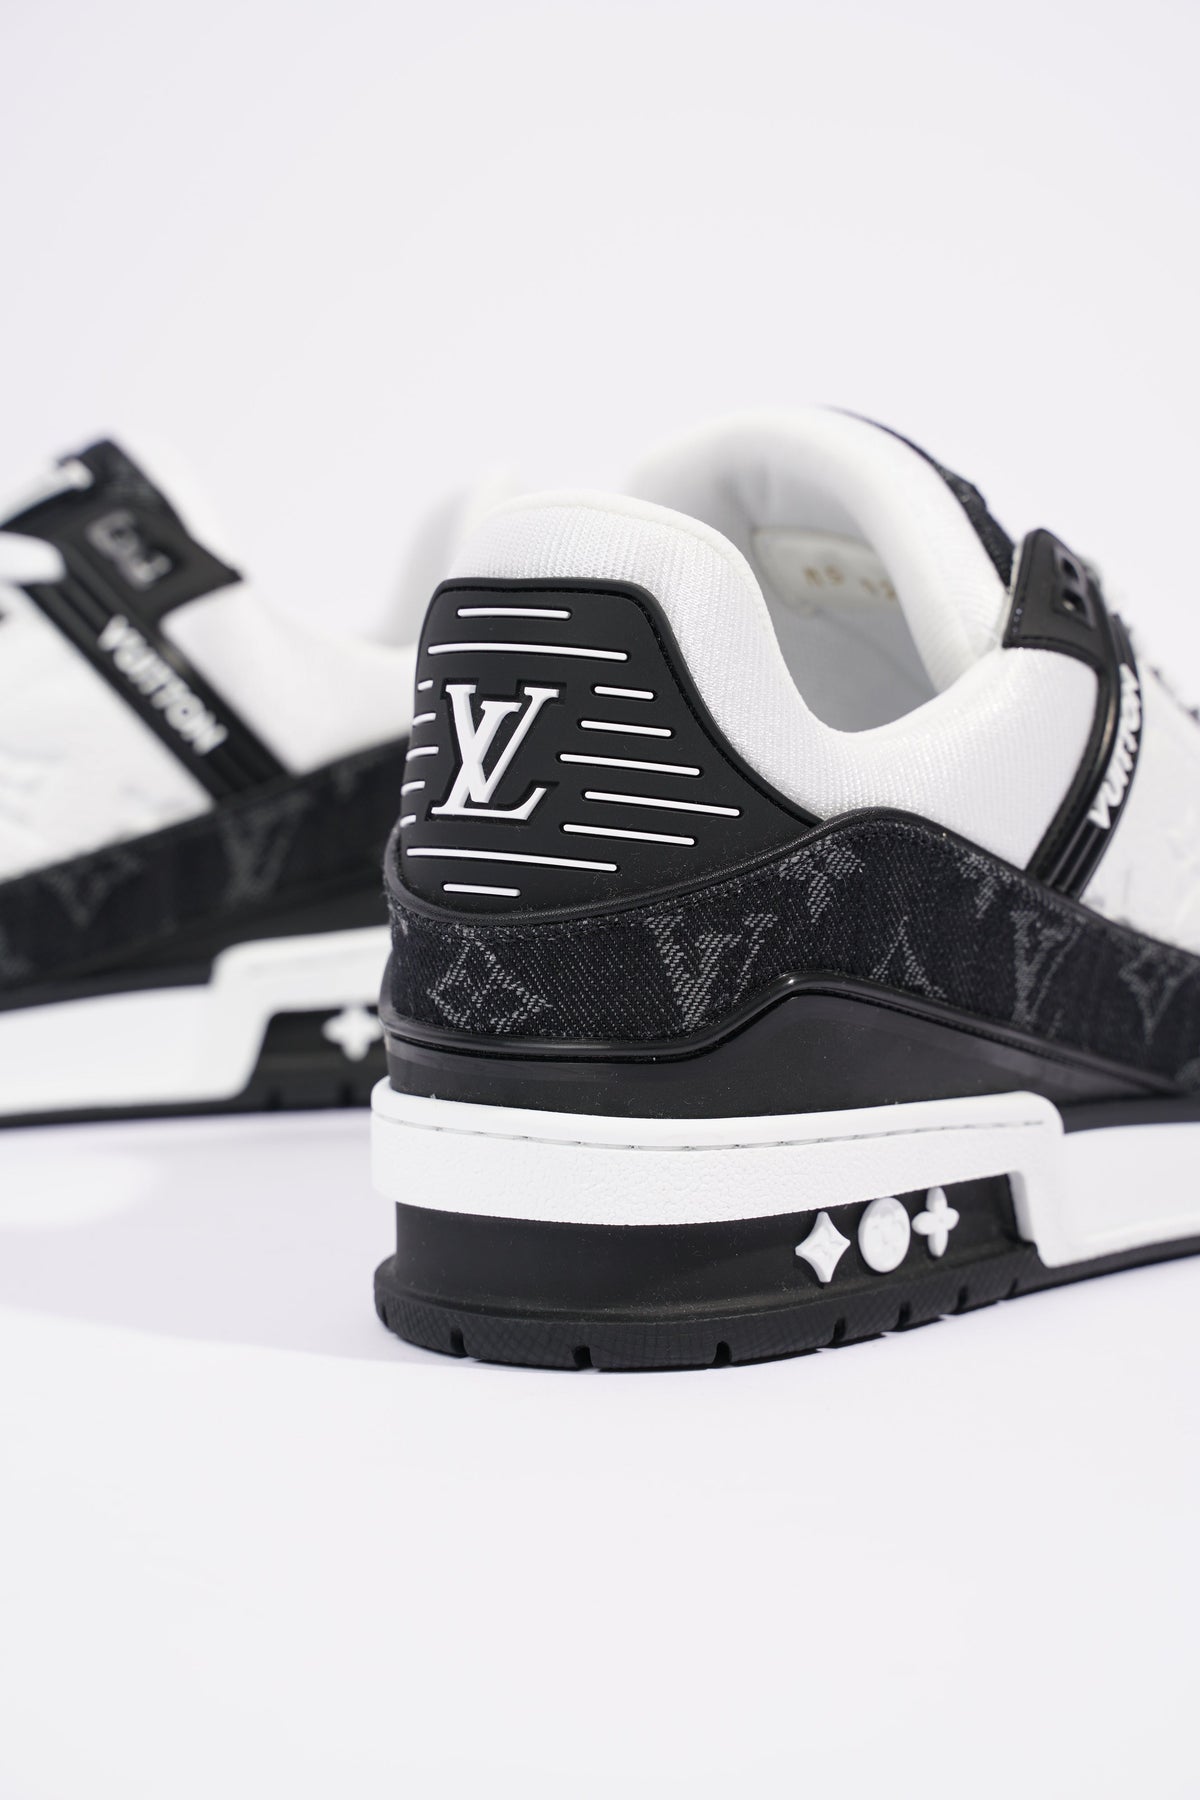 Virgil Abloh's latest Louis Vuitton men's trainers are limited edition  and they're only available to buy in London, London Evening Standard